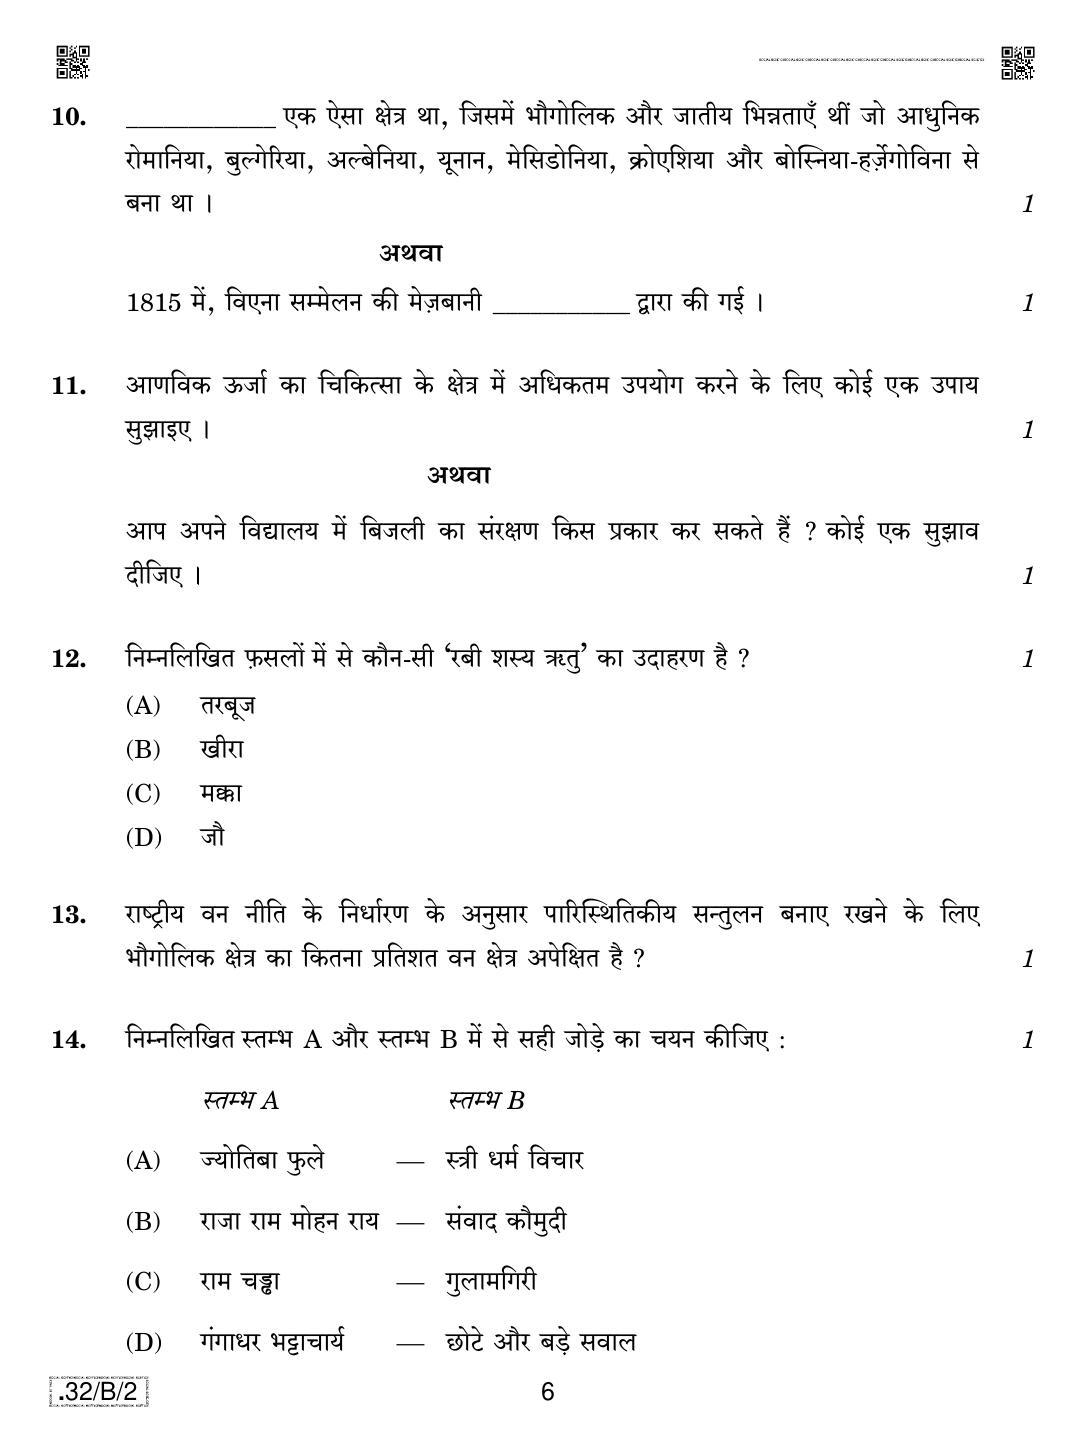 CBSE Class 10 32-C-2 Social Science 2020 Compartment Question Paper - Page 6